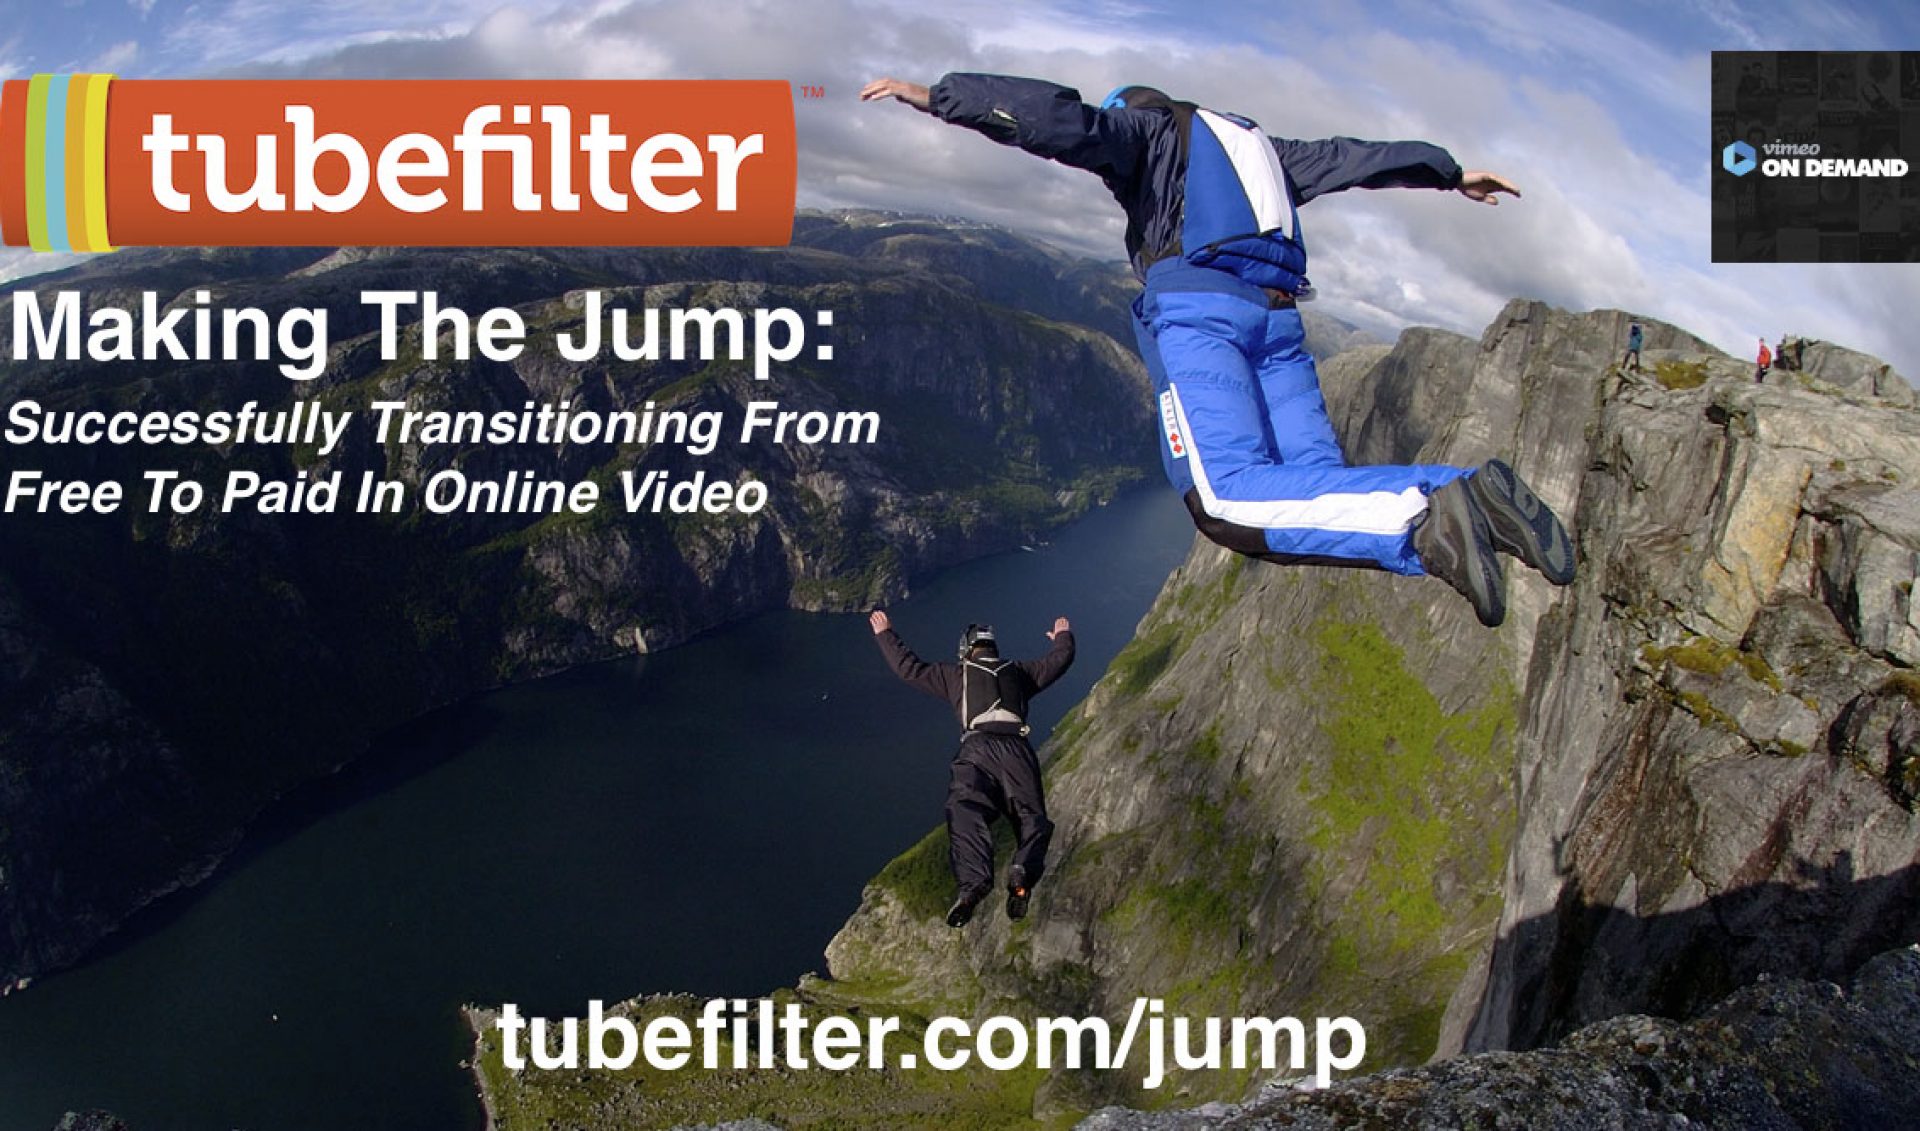 Tomorrow Tubefilter Meetup Making The Jump To Paid Video with Vimeo On Demand